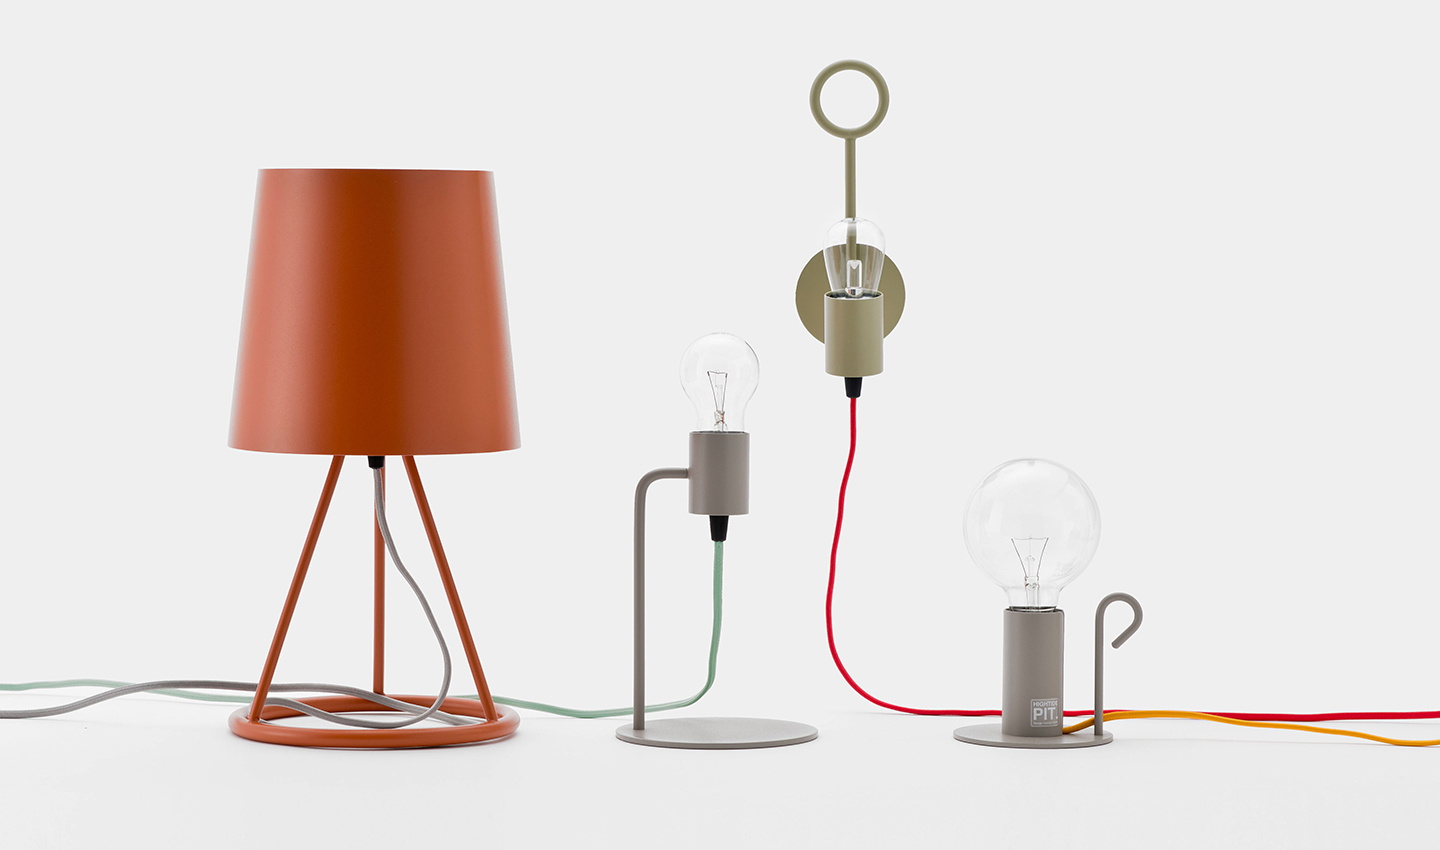 the lamp series capable ofselecting cable colours “Pit.”